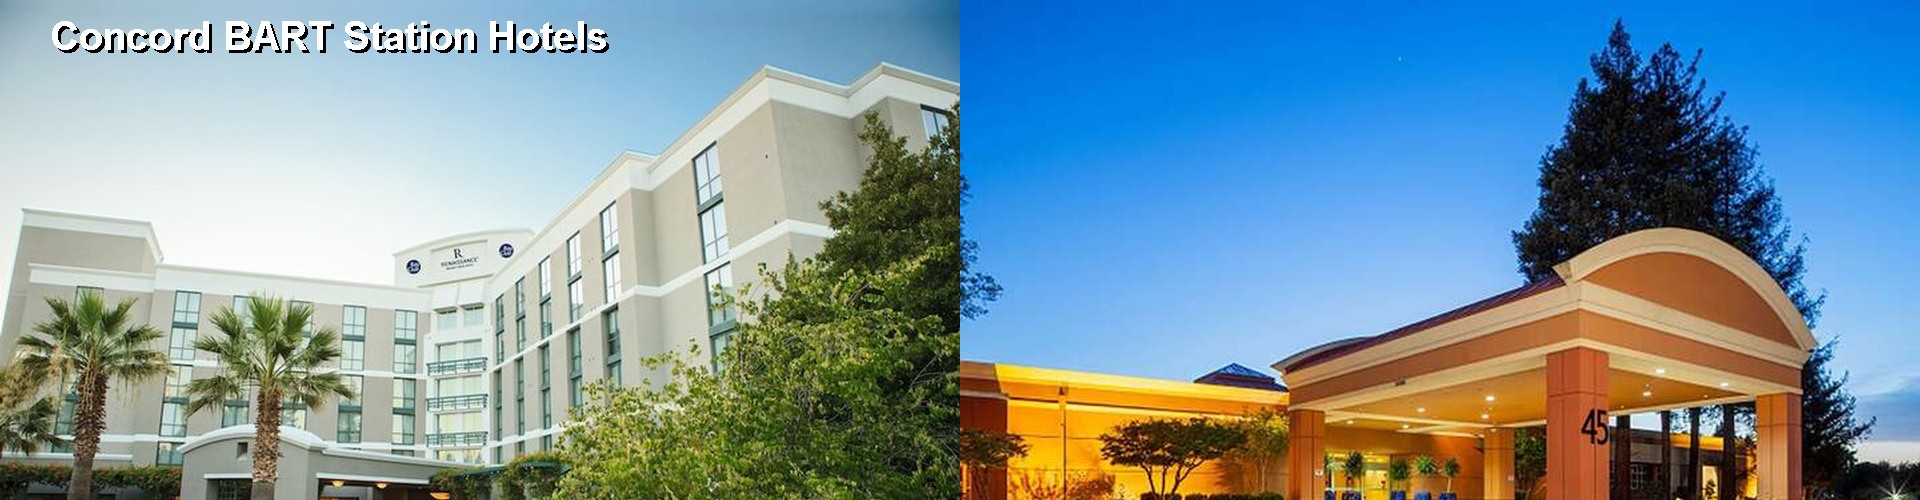 4 Best Hotels near Concord BART Station